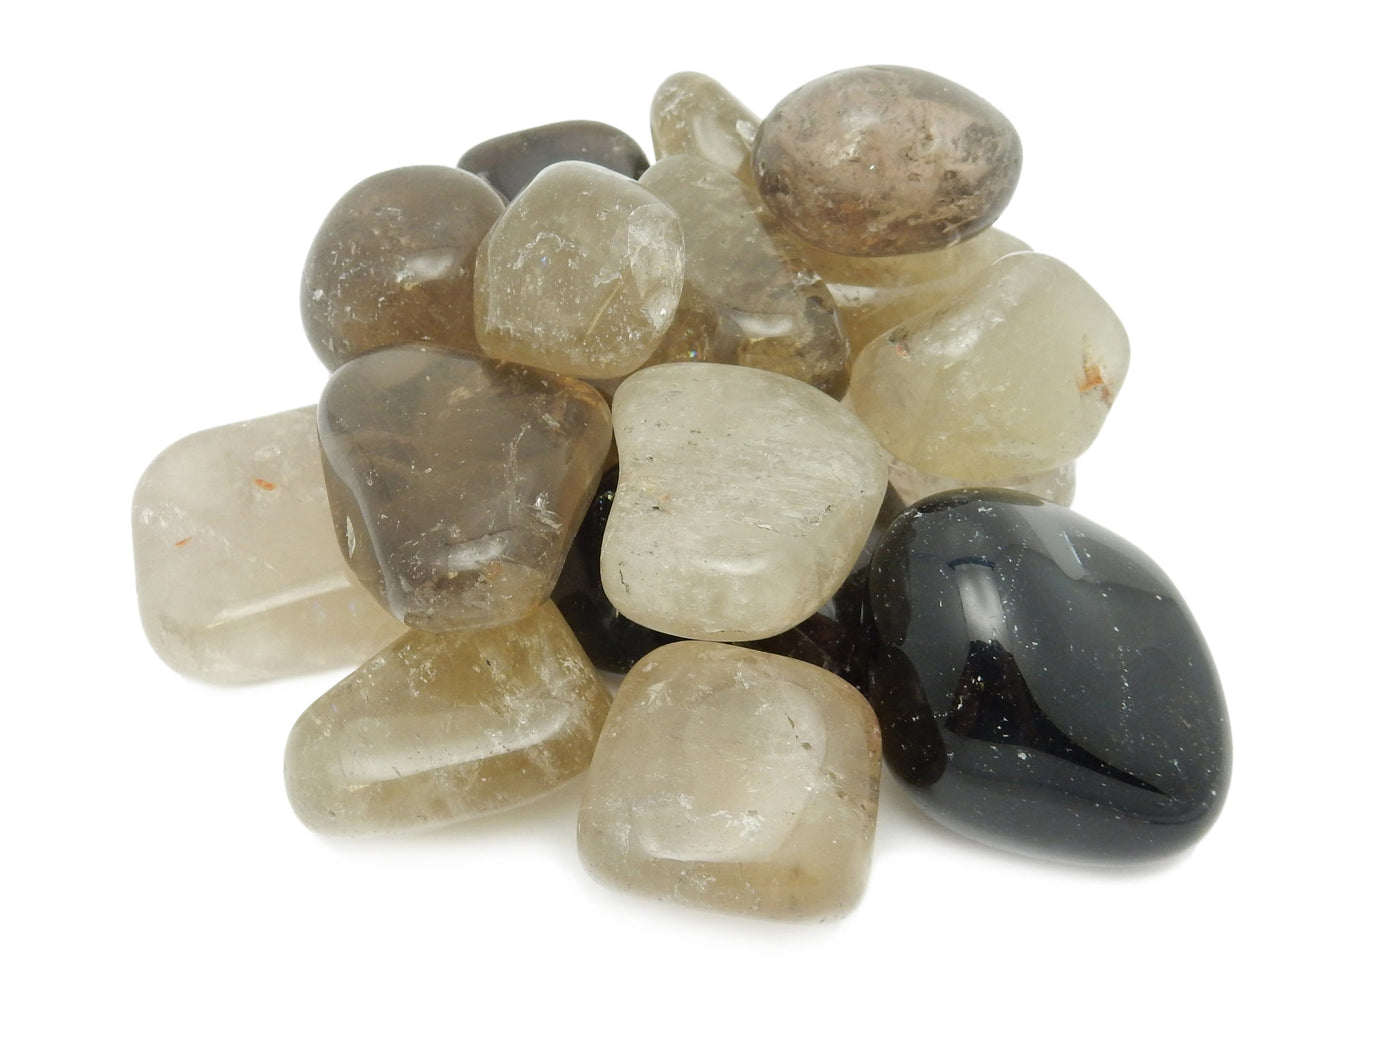 angled view of many smokey quartz tumbled gemstones in a pile on white background